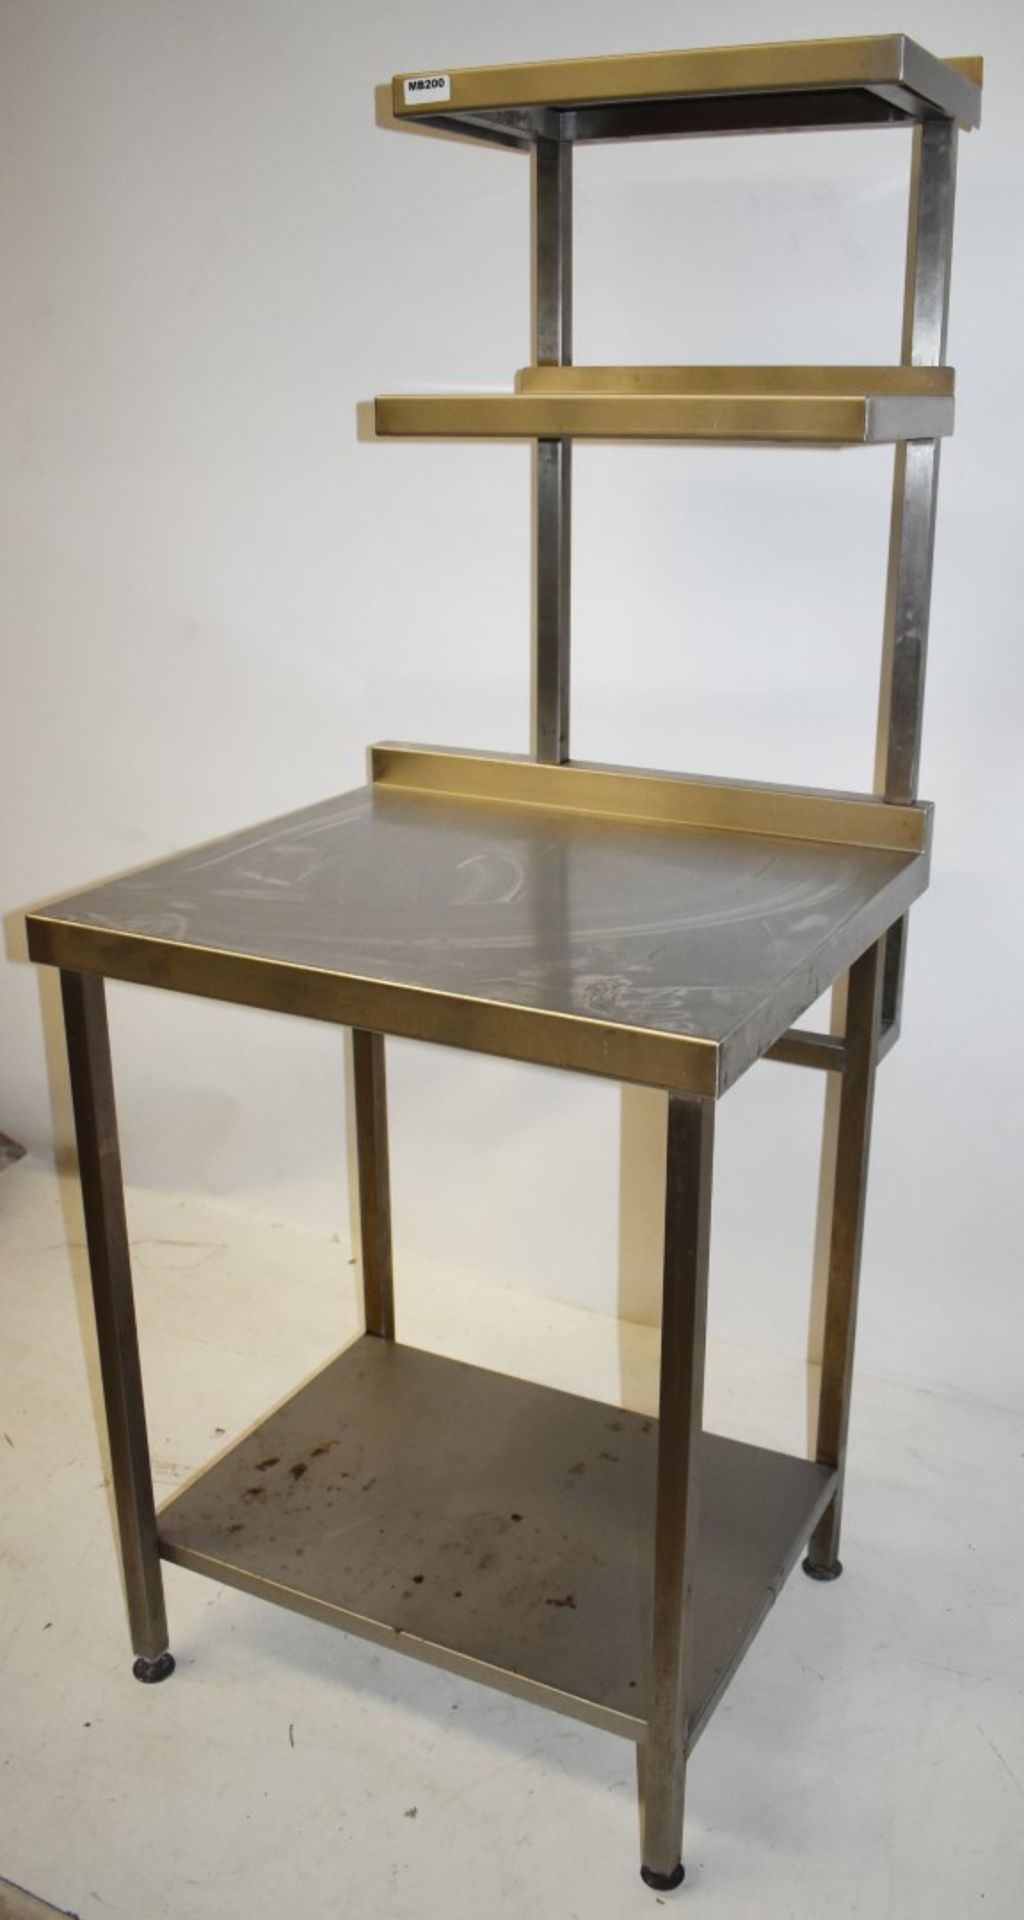 1 Stainless Steel Prep Bench With Undershelf and Overhead Shelves - H92/169 x W71 x D65 cms - - Image 3 of 4